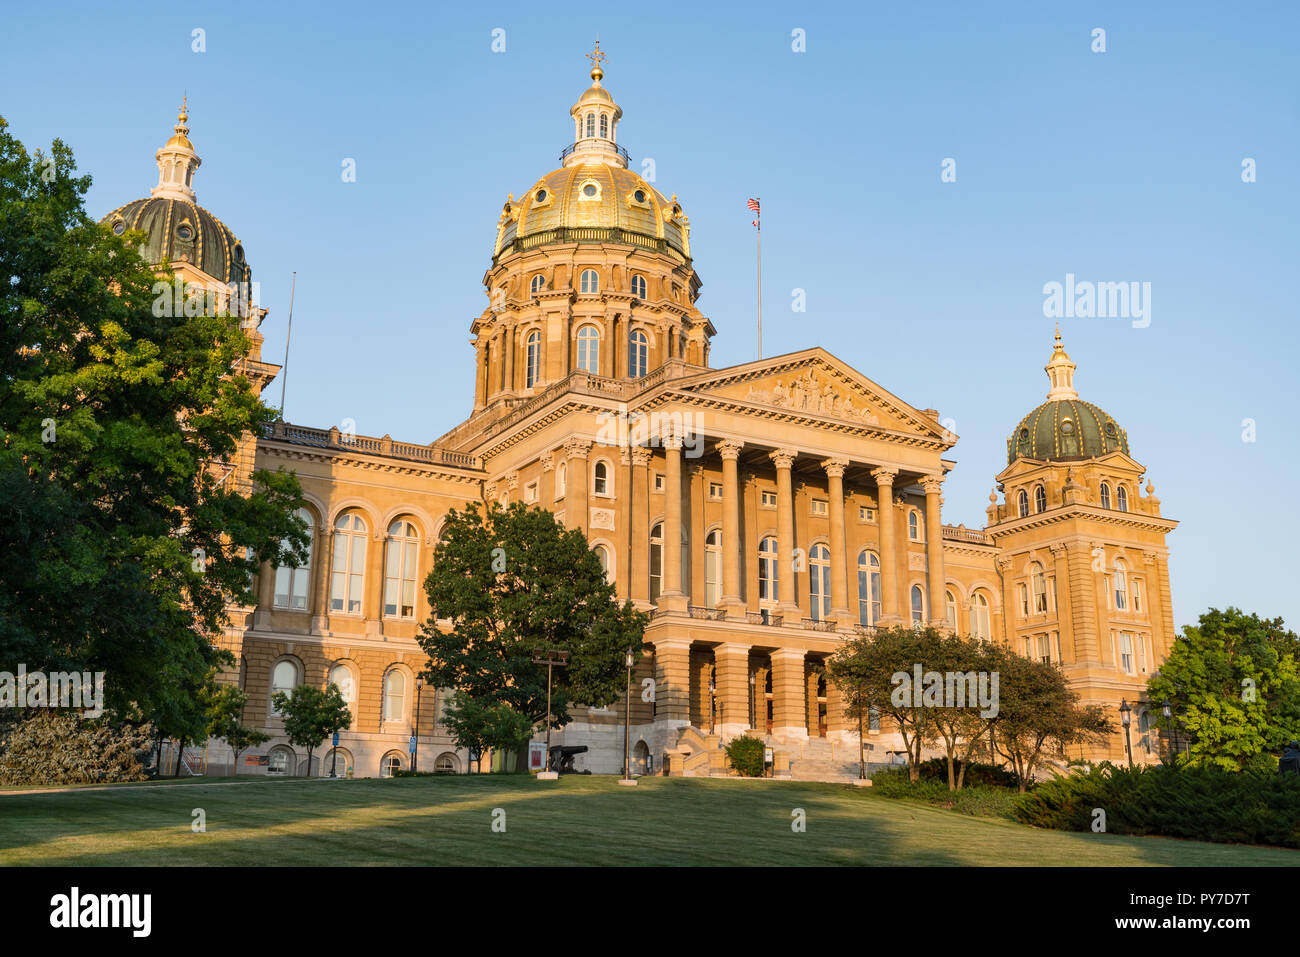 Facade of the Iowa State Capitol Building in Des Moines, Iowa Stock Photo